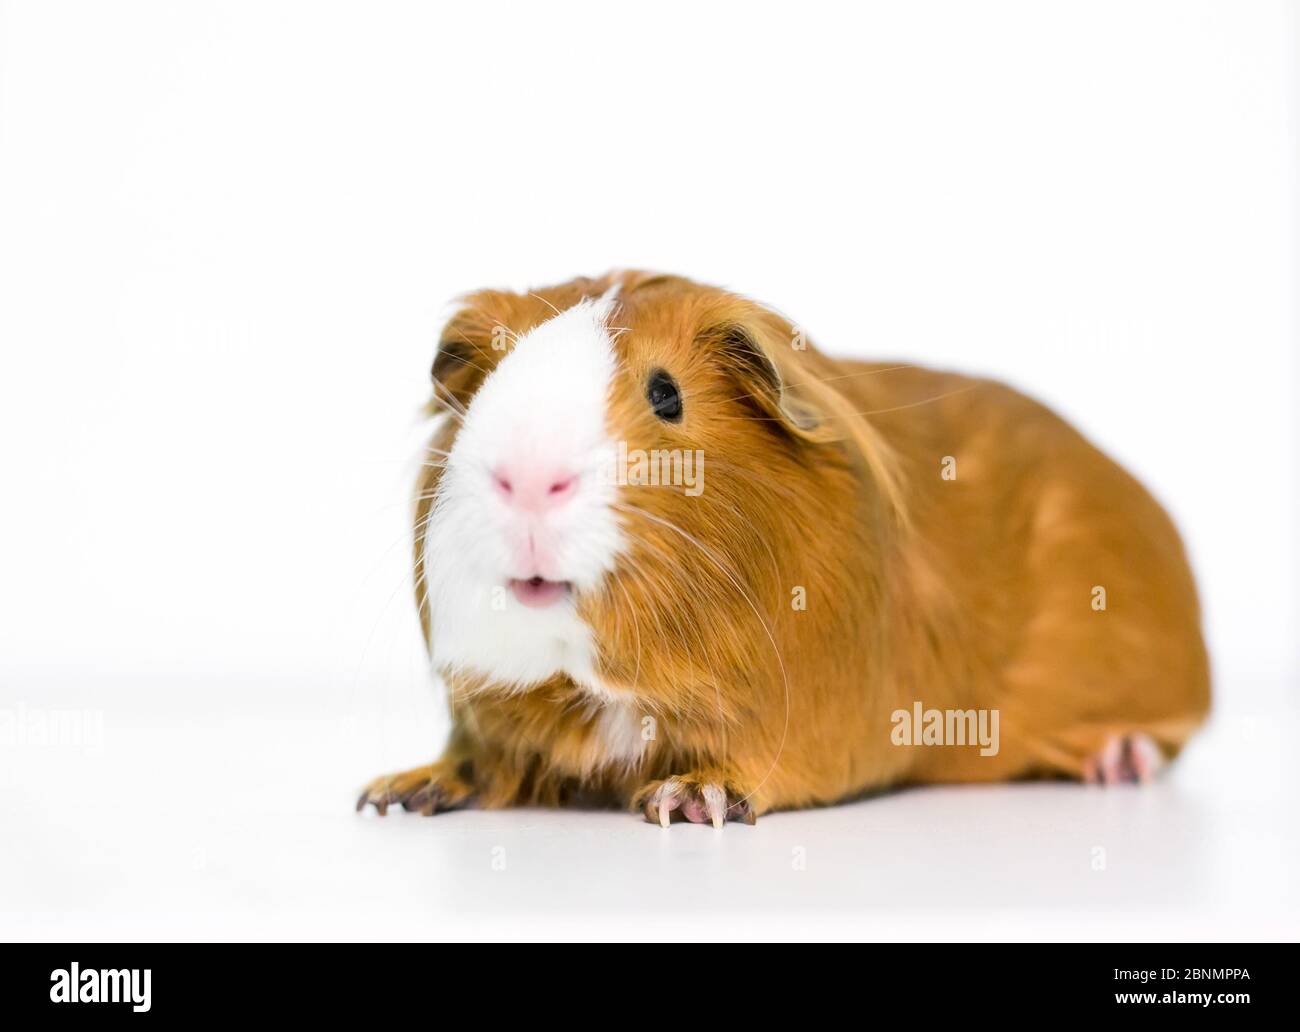 A red and white domestic Guinea Pig on a white background Stock Photo